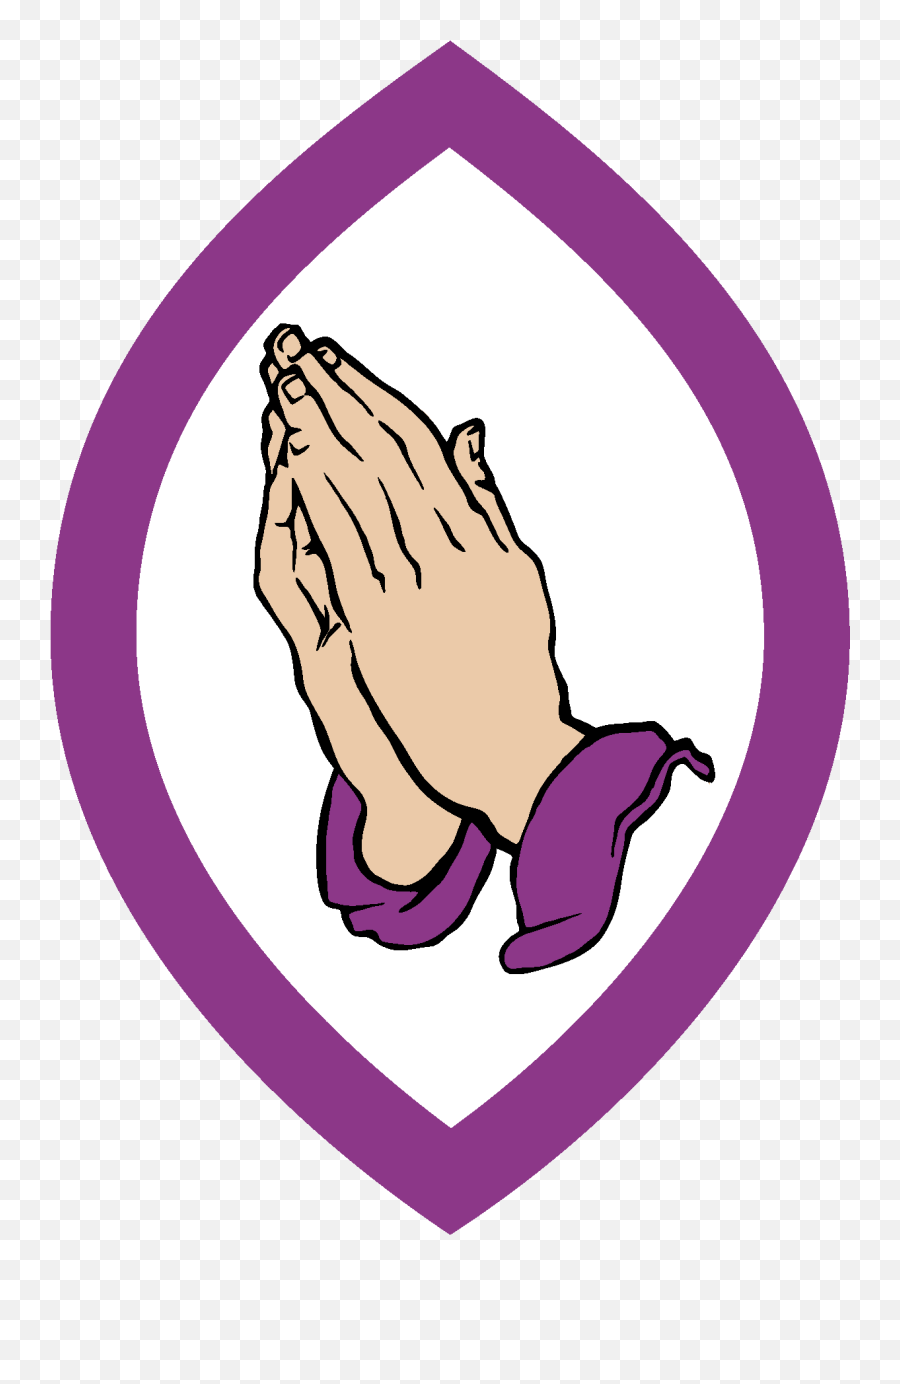 Upcoming Events Clipart - Hand Blessing Logo Emoji,Upcoming Events Clipart